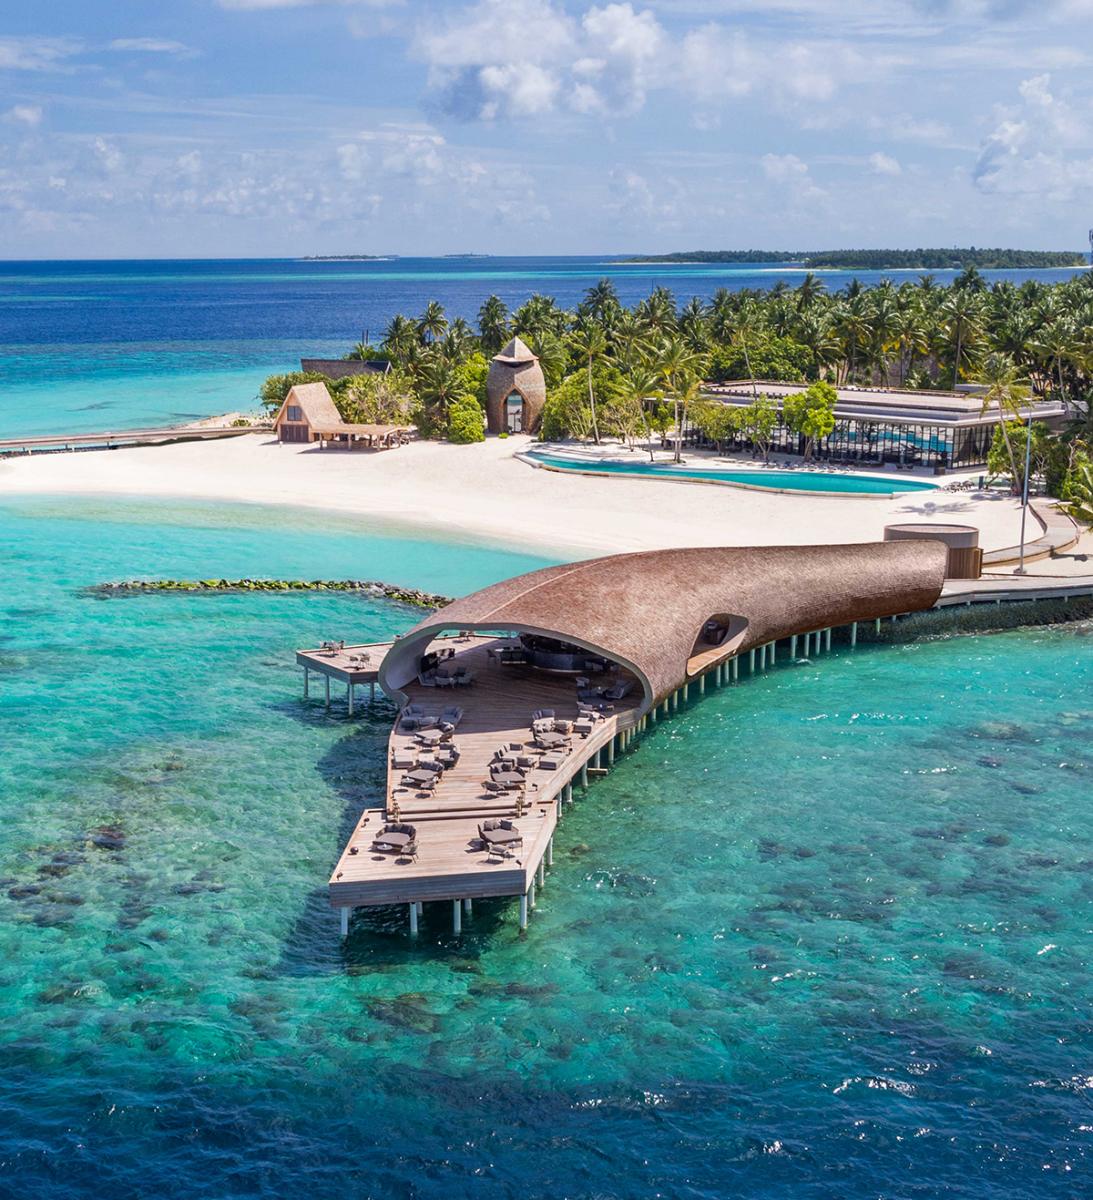 Luxurious holiday in an exotic atmosphere: the St. Regis Maldives Vommuli Resort